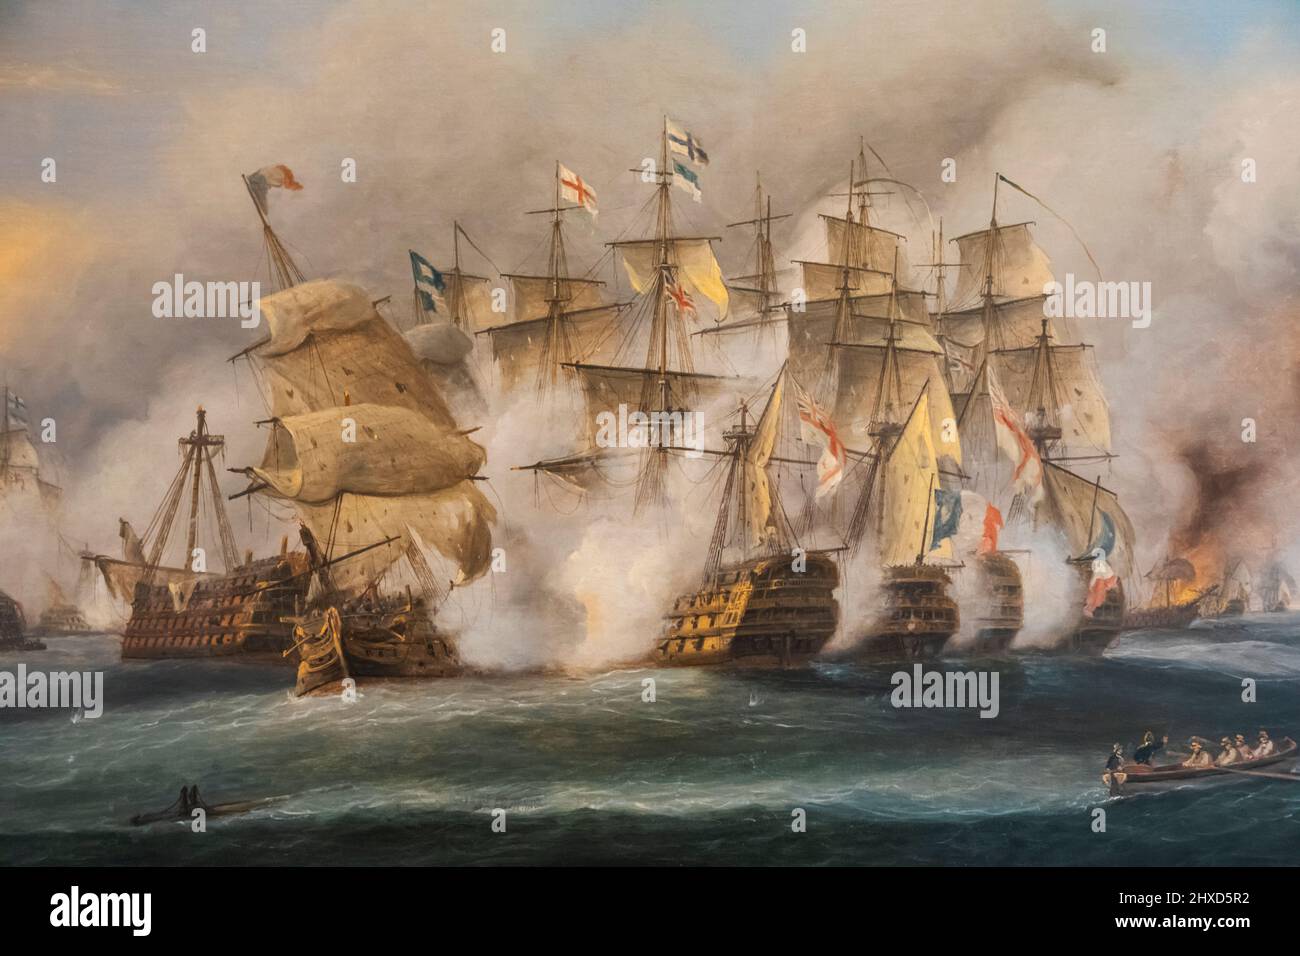 England, Hampshire, Portsmouth, Portsmouth Historic Dockyard, The Royal Navy National Museum, Oil Painting titled 'The Battle of Trafalgar' depicting the scene on 21 October 1805 by Thomas Luny Stock Photo